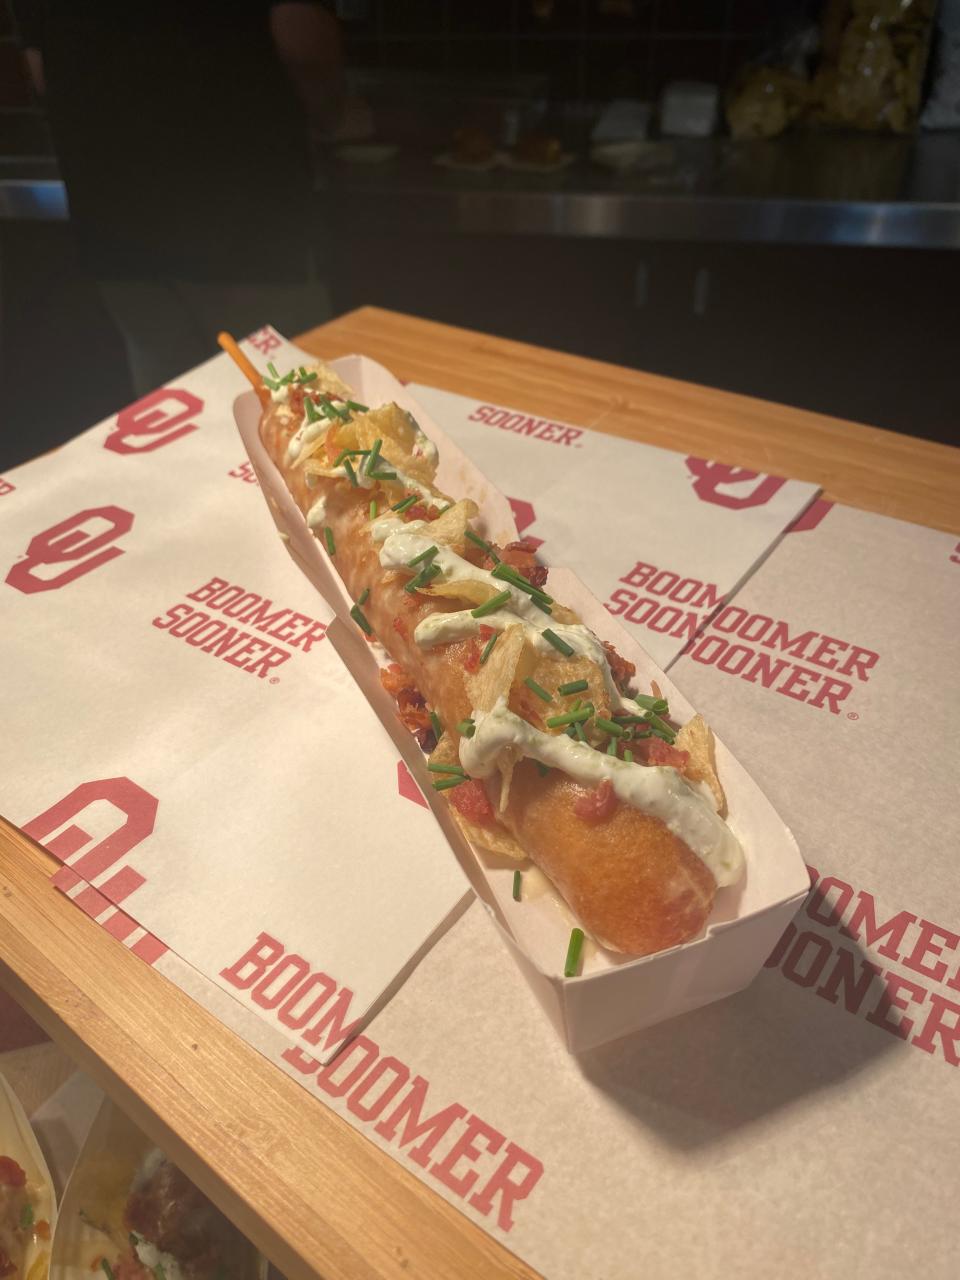 Actual size of the Stormchaser dog from Levy restaurants that will be available at rotating OU home football games this season.